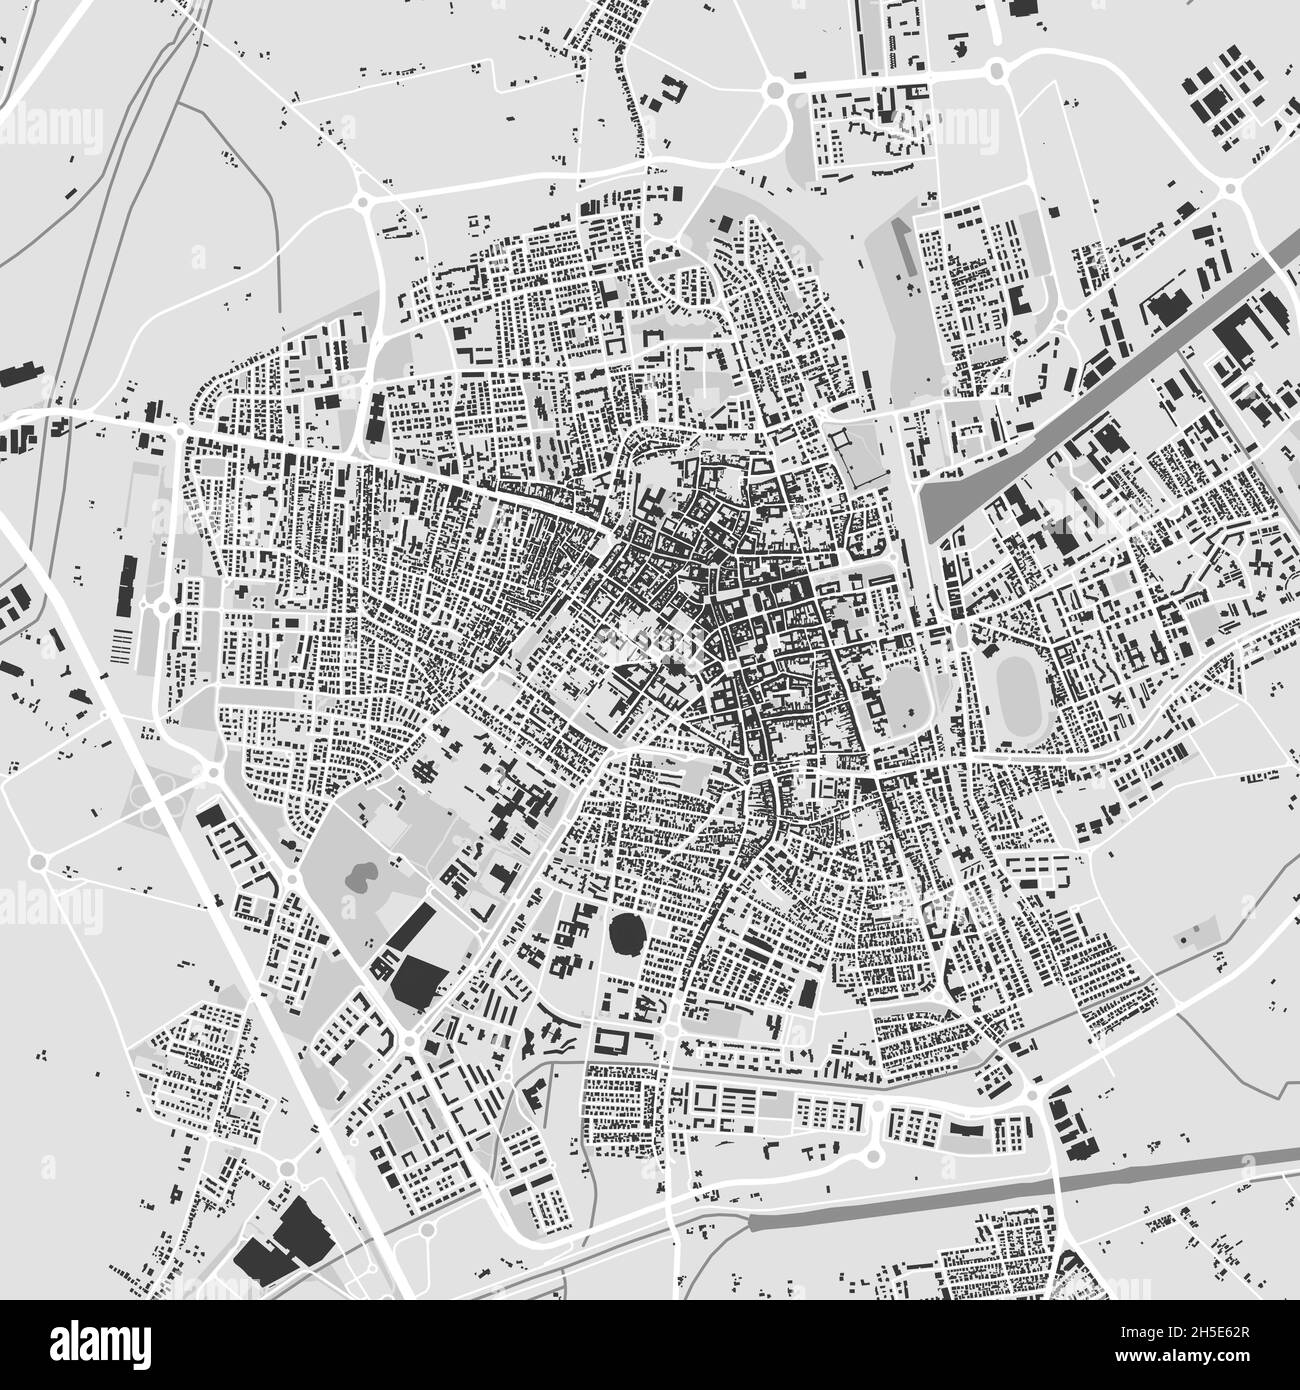 Urban city vector map of Ravenna. Vector illustration, Ravenna map grayscale black and white art poster. Street map image with roads, metropolitan cit Stock Vector